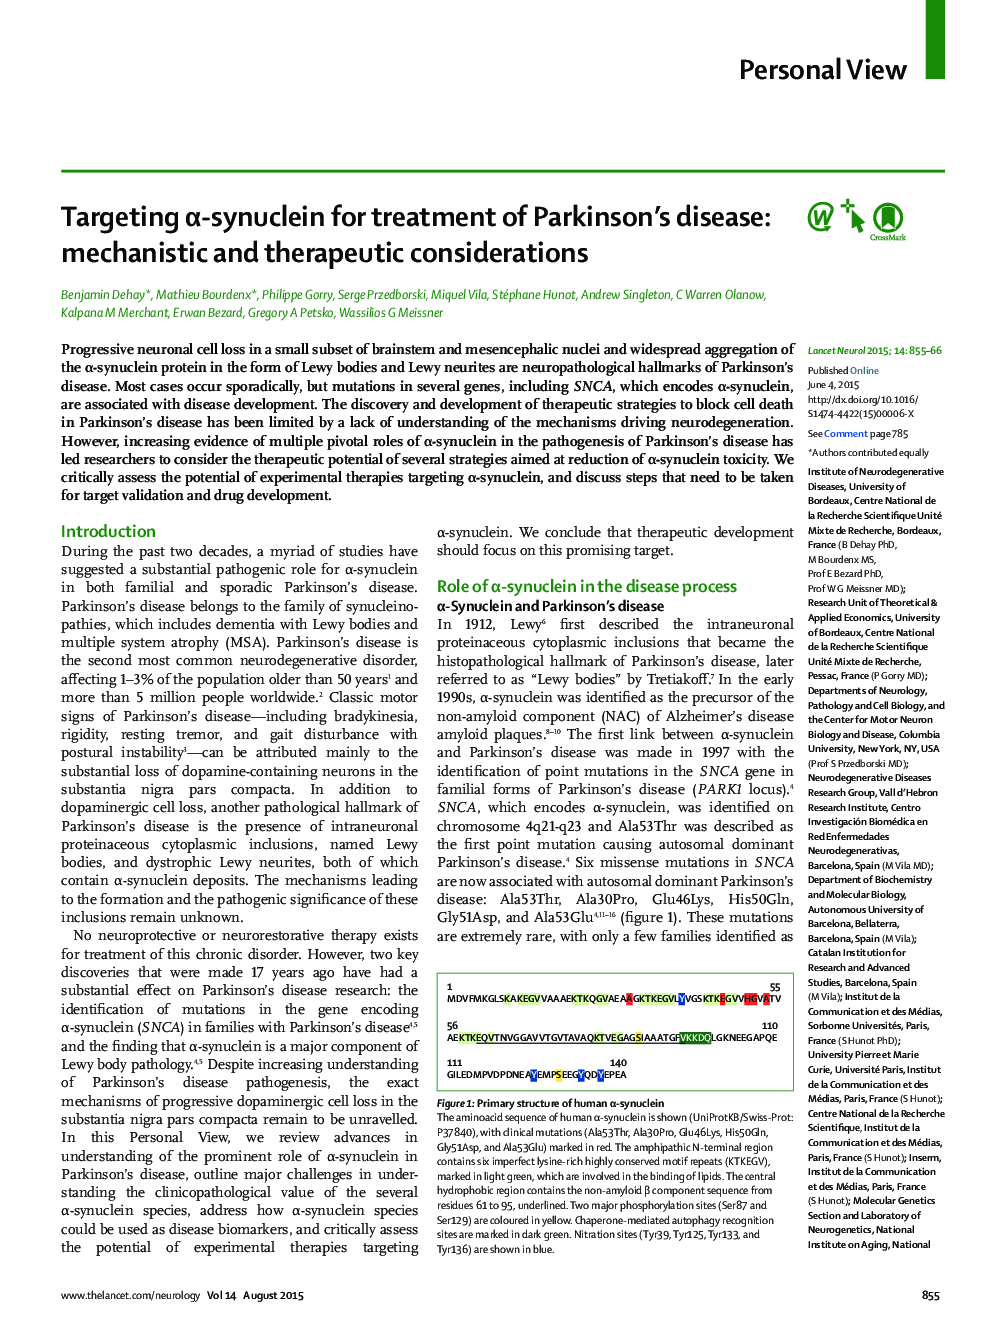 Targeting α-synuclein for treatment of Parkinson's disease: mechanistic and therapeutic considerations